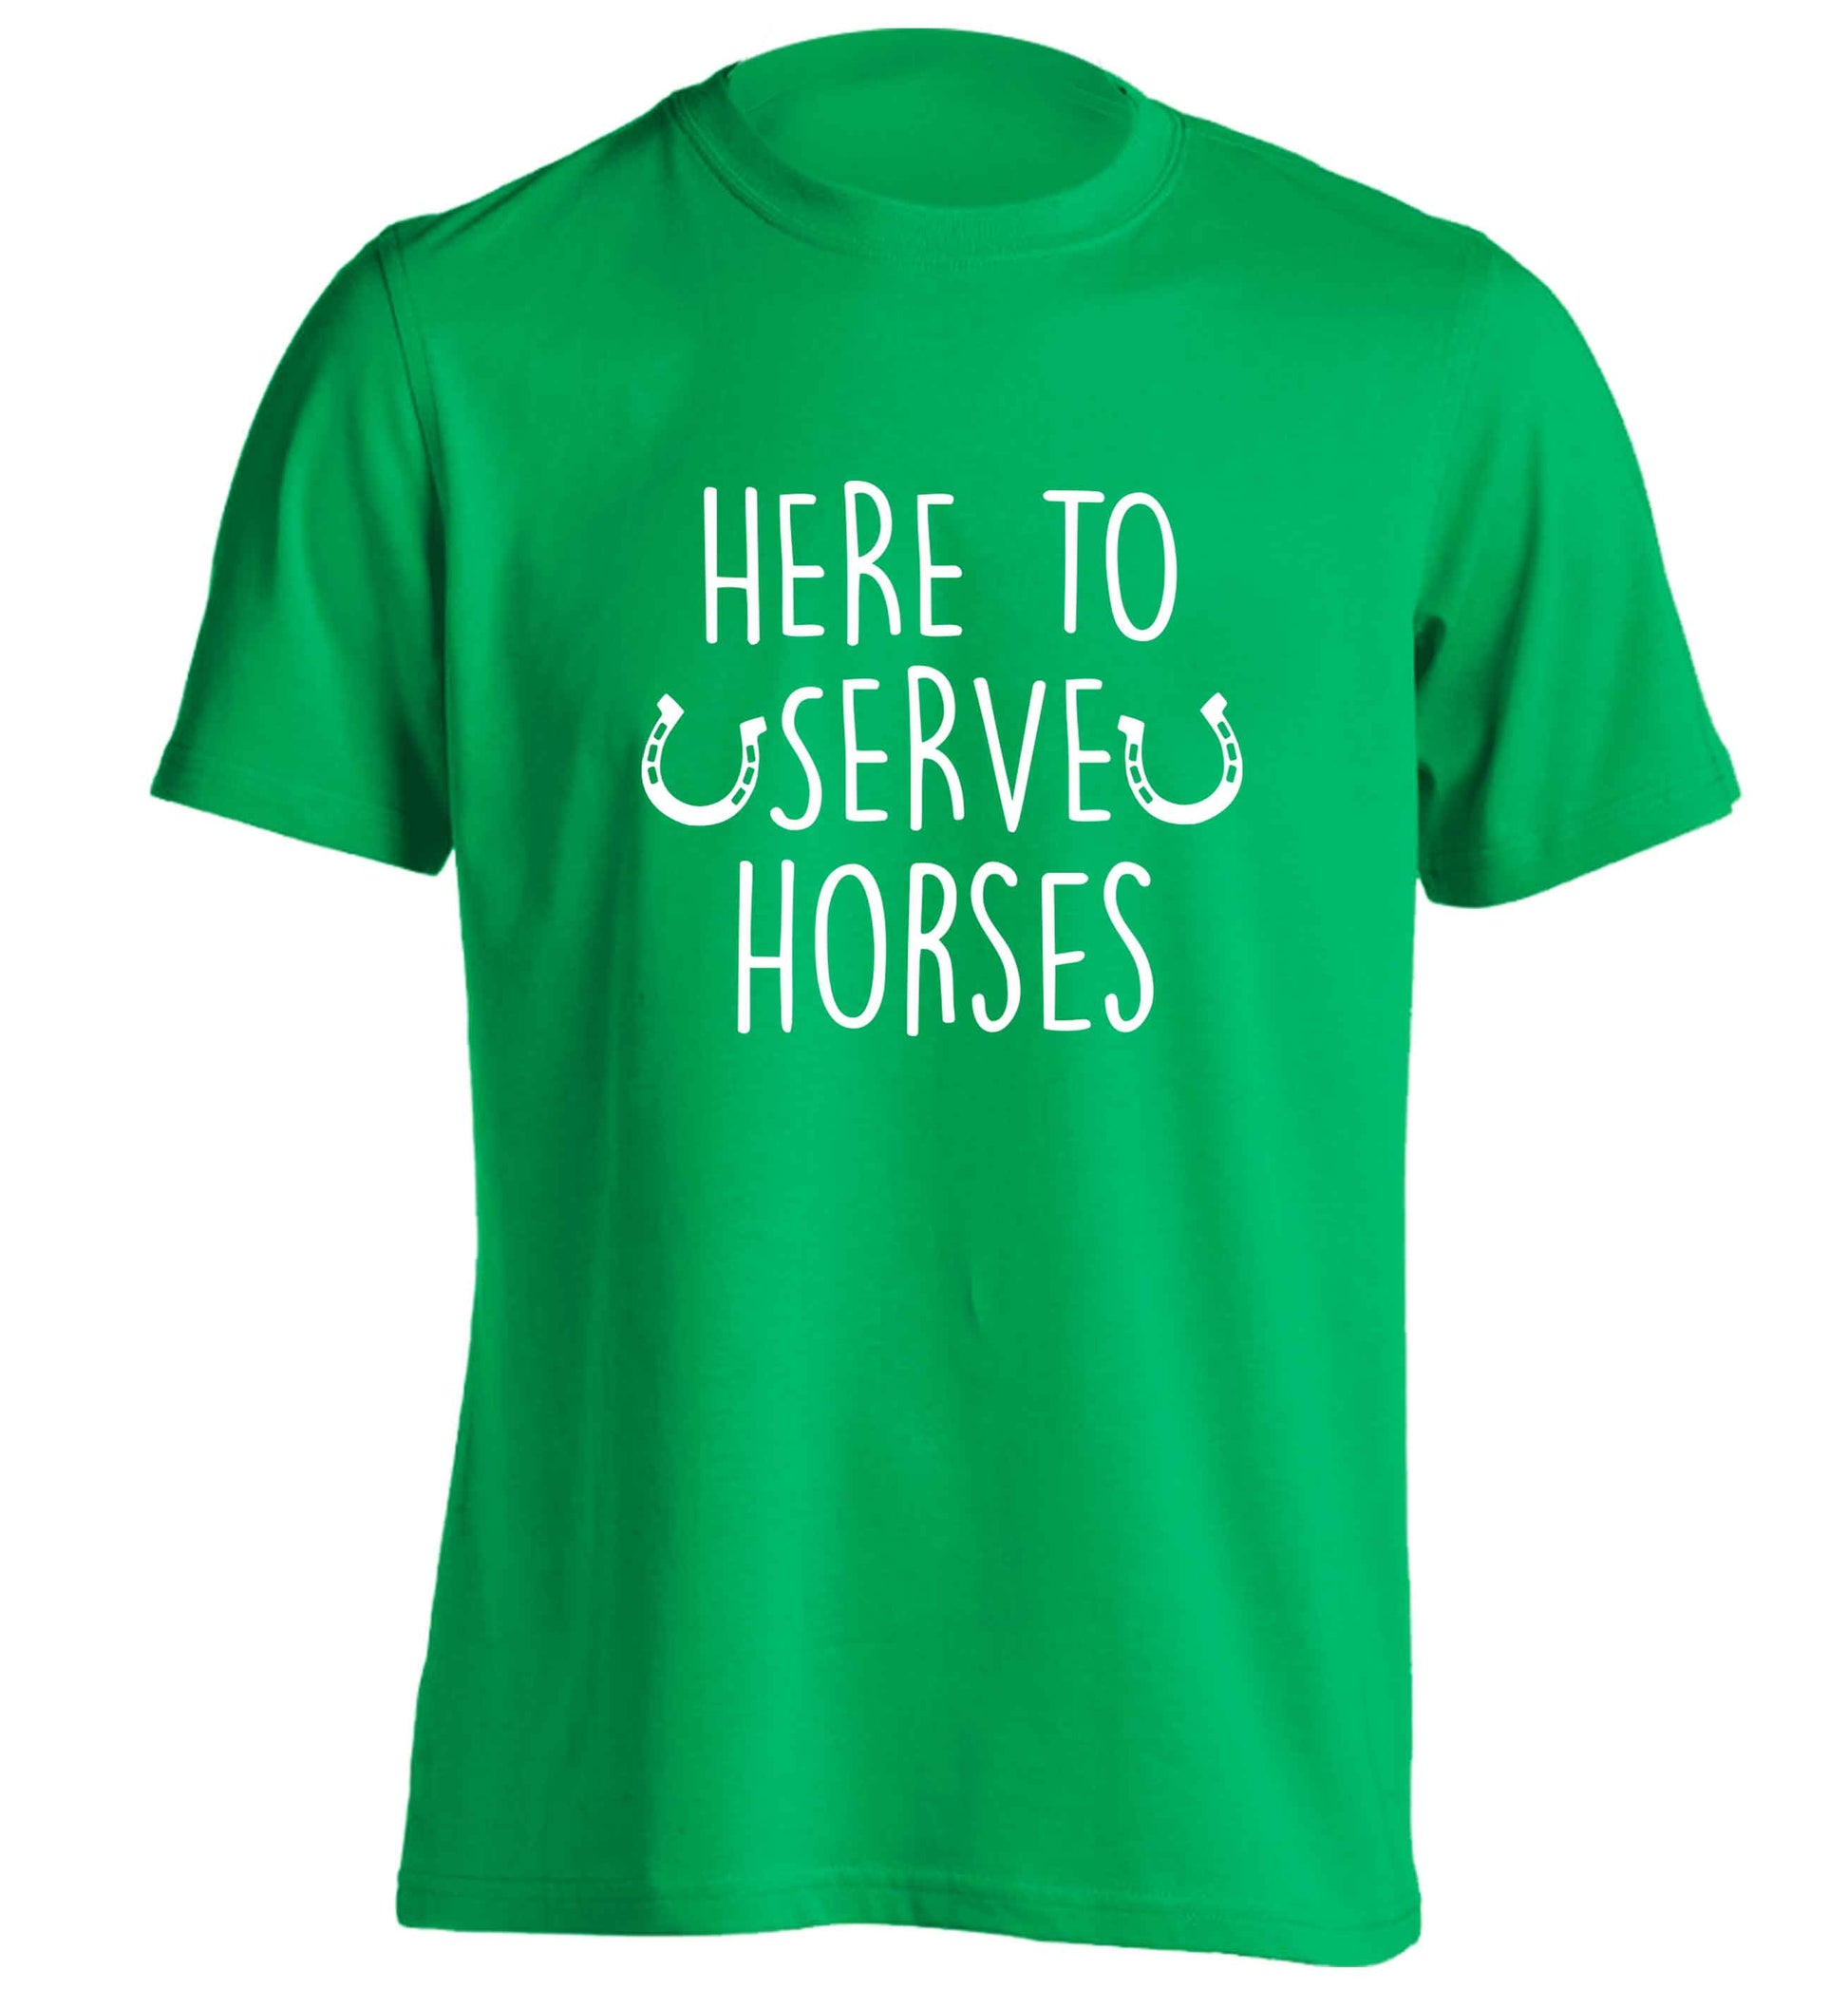 Here to serve horses adults unisex green Tshirt 2XL